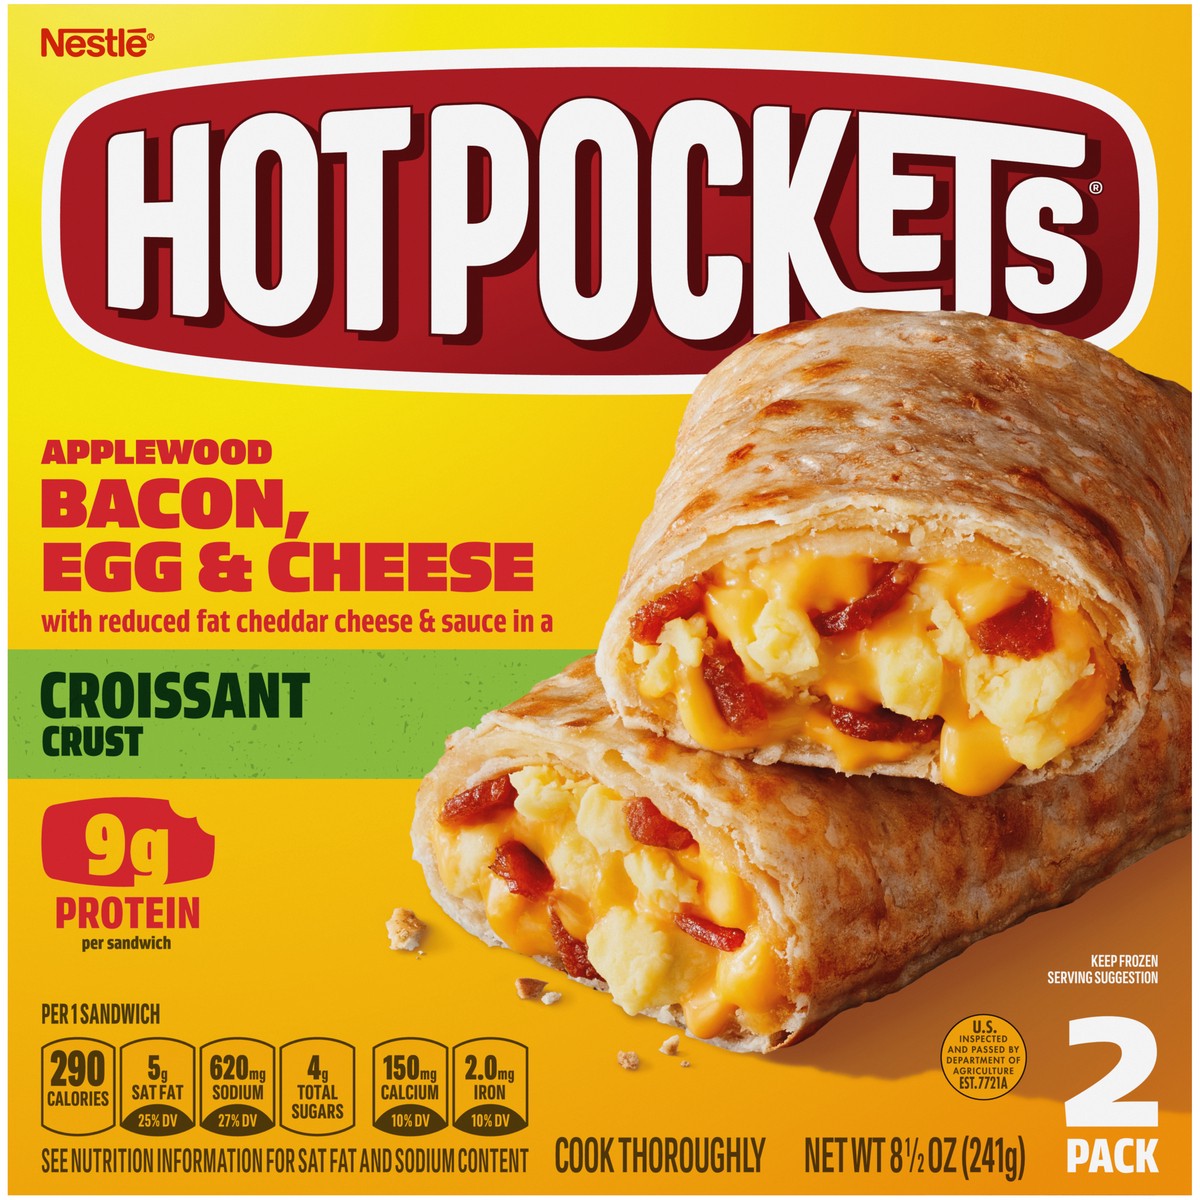 slide 6 of 9, Hot Pockets Applewood Bacon, Egg & Cheese Croissant Crust Frozen Breakfast Sandwiches, Breakfast Hot Pockets Made with Cheddar Cheese, 2 Count, 8.5 oz